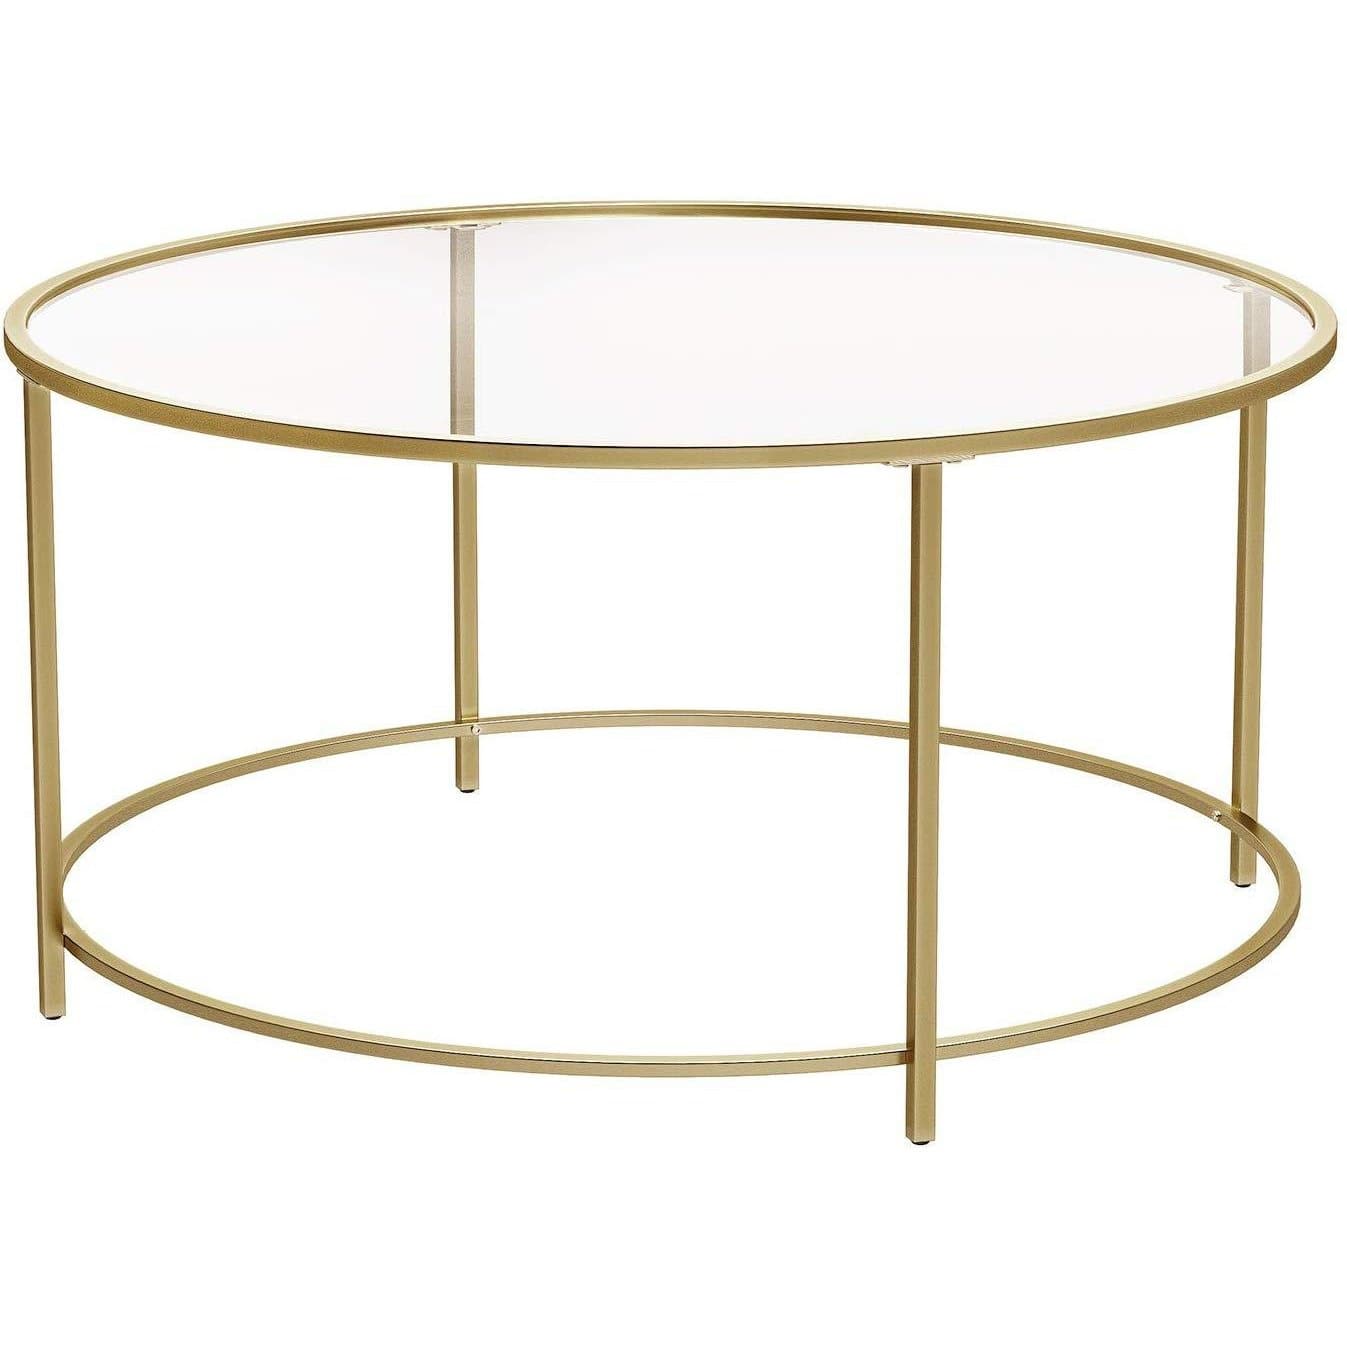 Nancy's Brighton Park Coffee Table - Round Glass Table - Iron Frame - Side Table - Gold / Rose Goldx